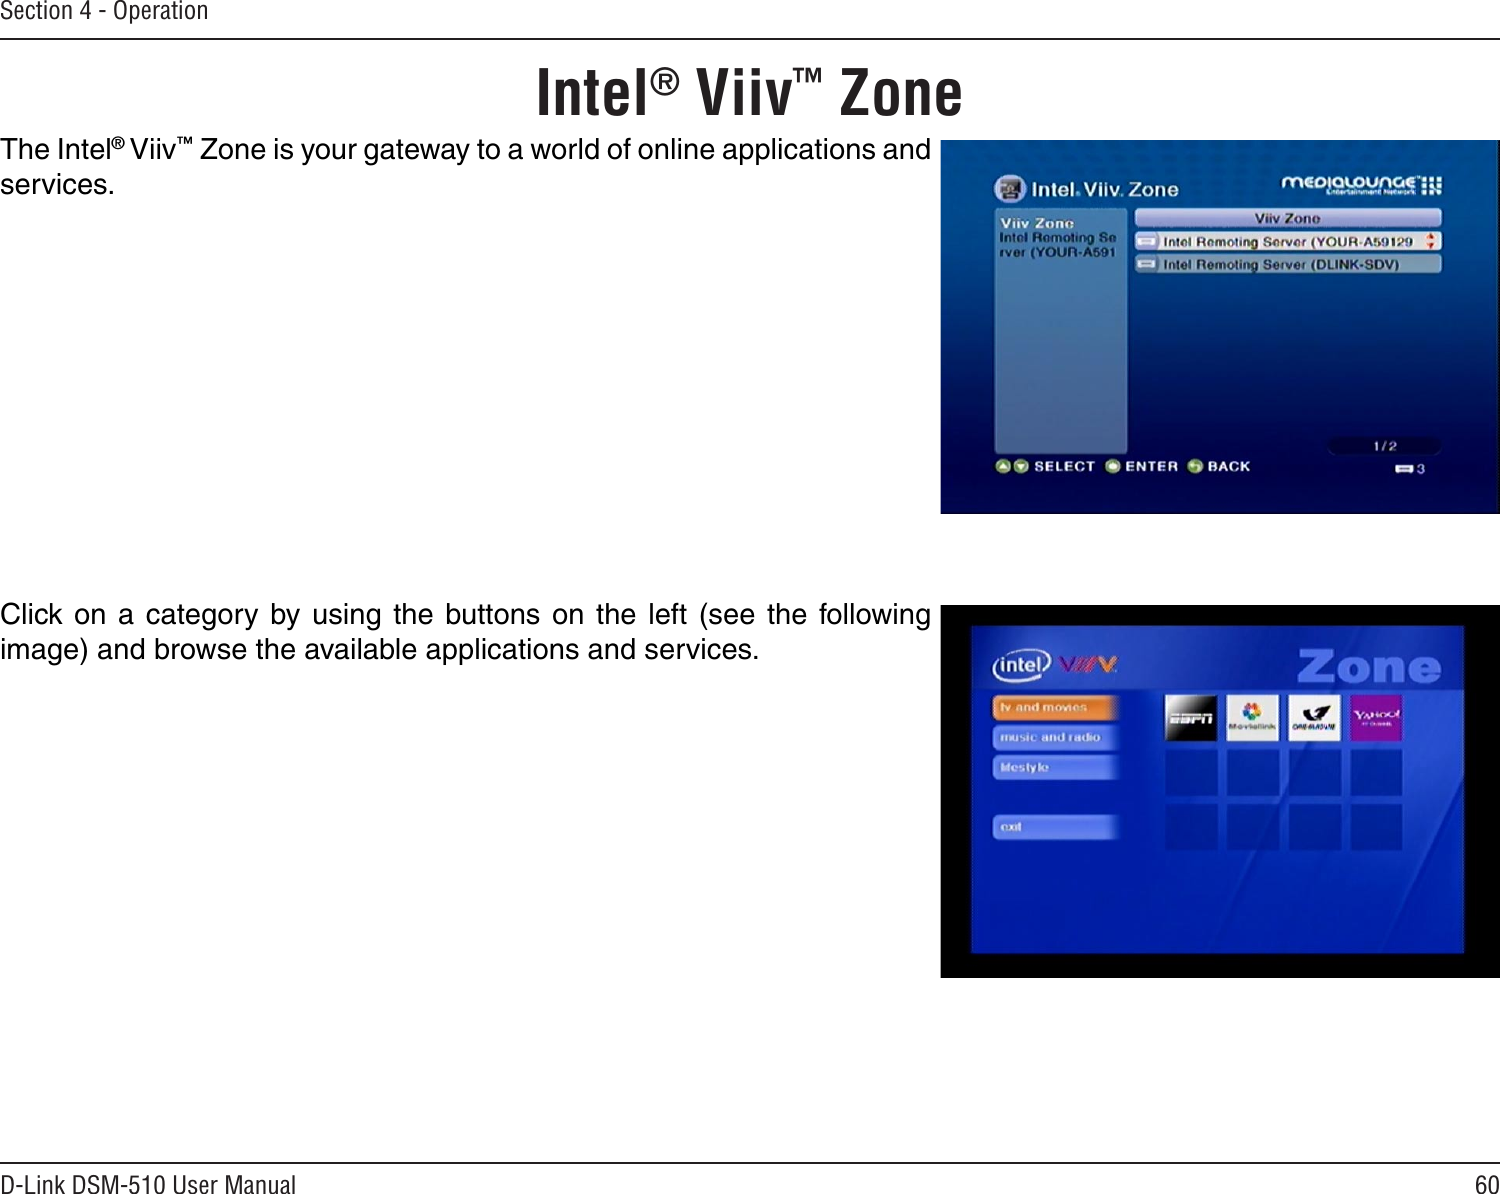 60D-Link DSM-510 User ManualSection 4 - OperationThe Intel® Viiv™ Zone is your gateway to a world of online applications and services.Click  on  a category  by  using  the  buttons  on  the left  (see  the  following image) and browse the available applications and services.Intel® Viiv™ Zone